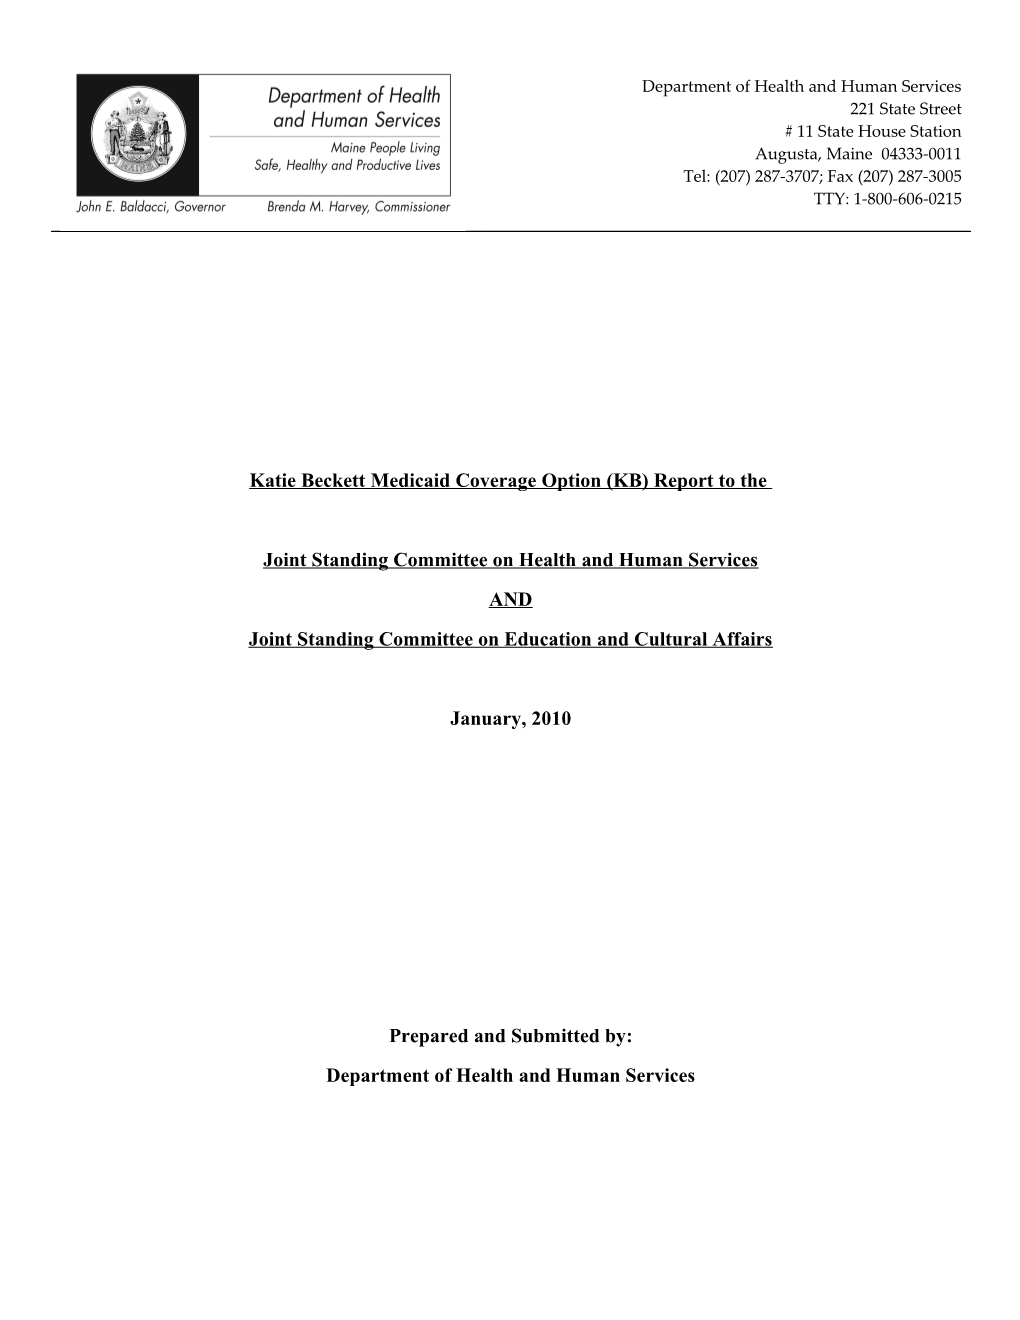 Katie Beckett Medicaid Coverage Option (KB) Report to The